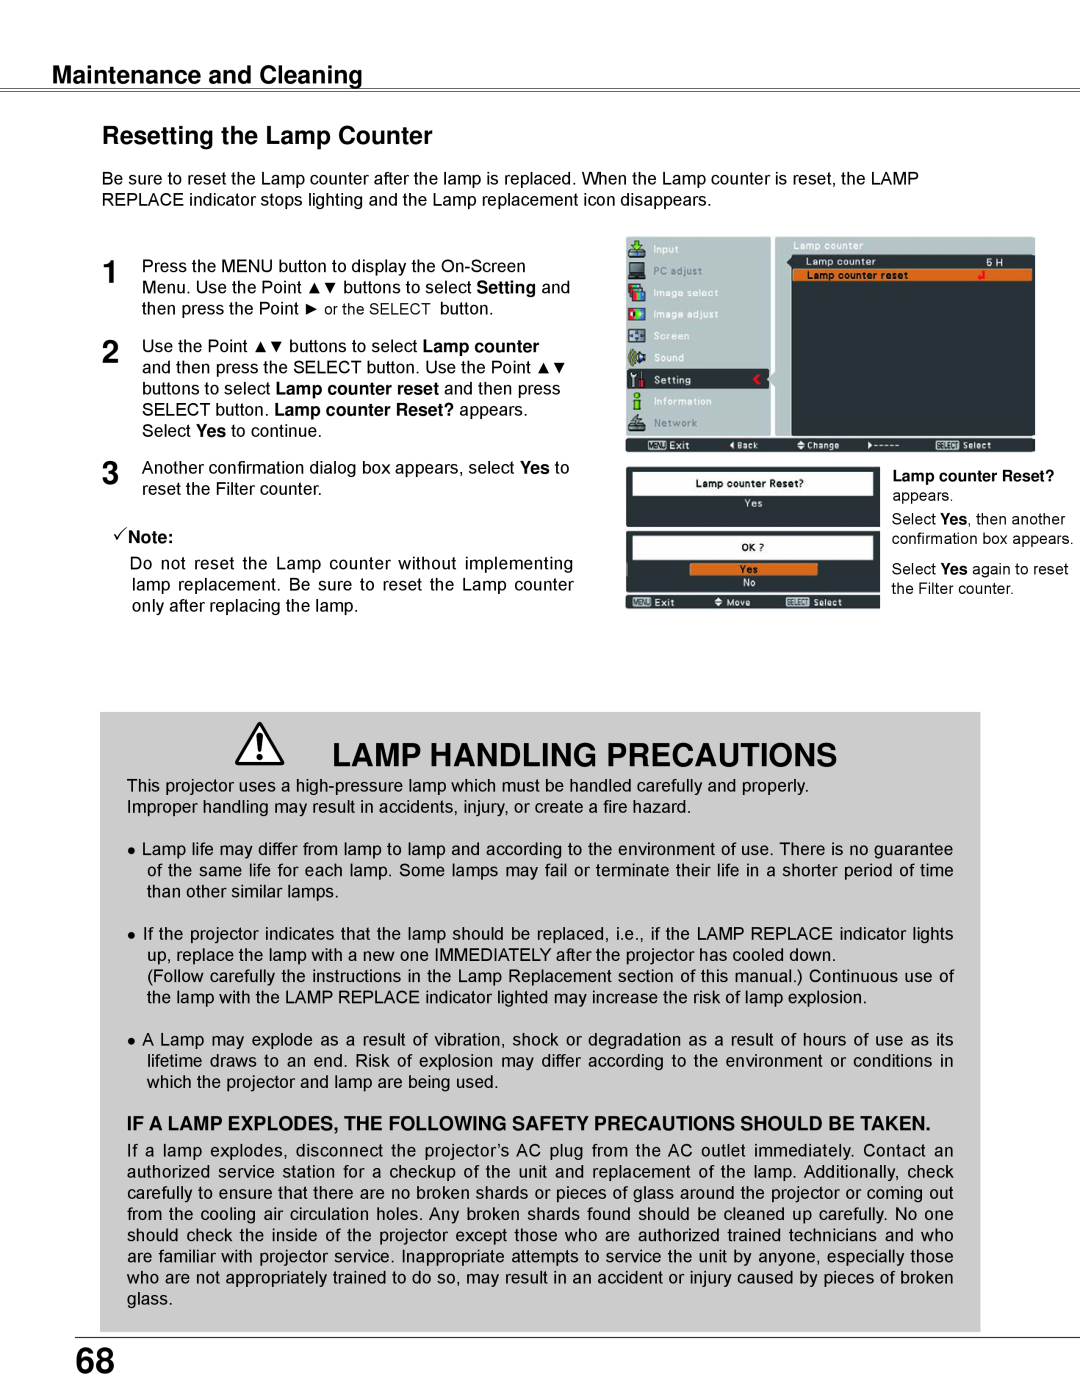 Sanyo PLC-WXU700 owner manual Maintenance and Cleaning Resetting the Lamp Counter, Lamp Handling Precautions, Note 